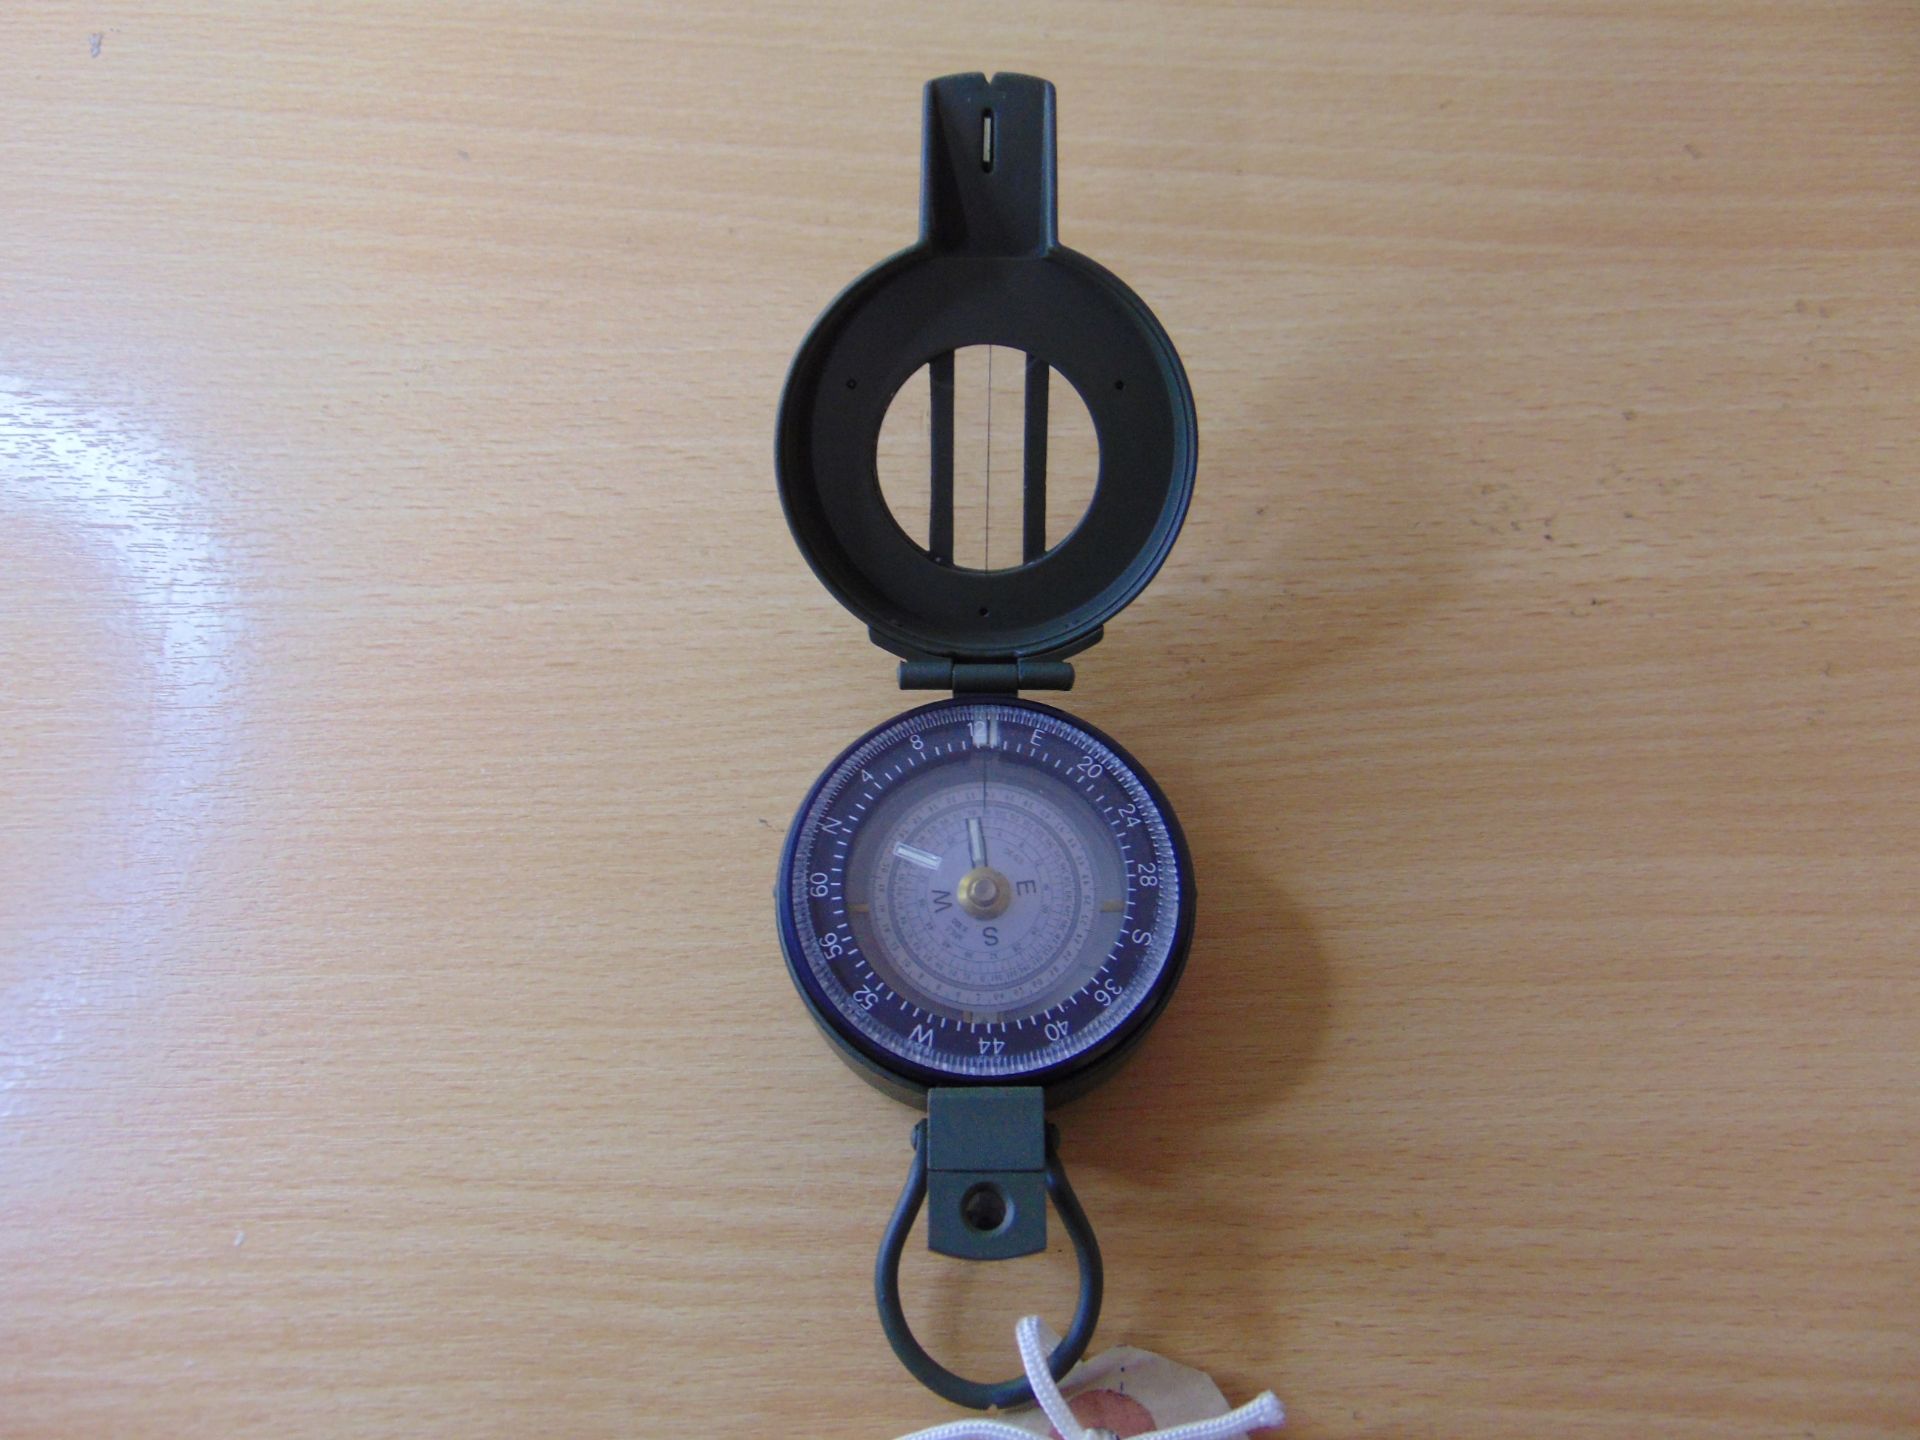 New and Unissued Francis Bake M88 Prismatic Compass Nato Marks in Mils - Image 3 of 3